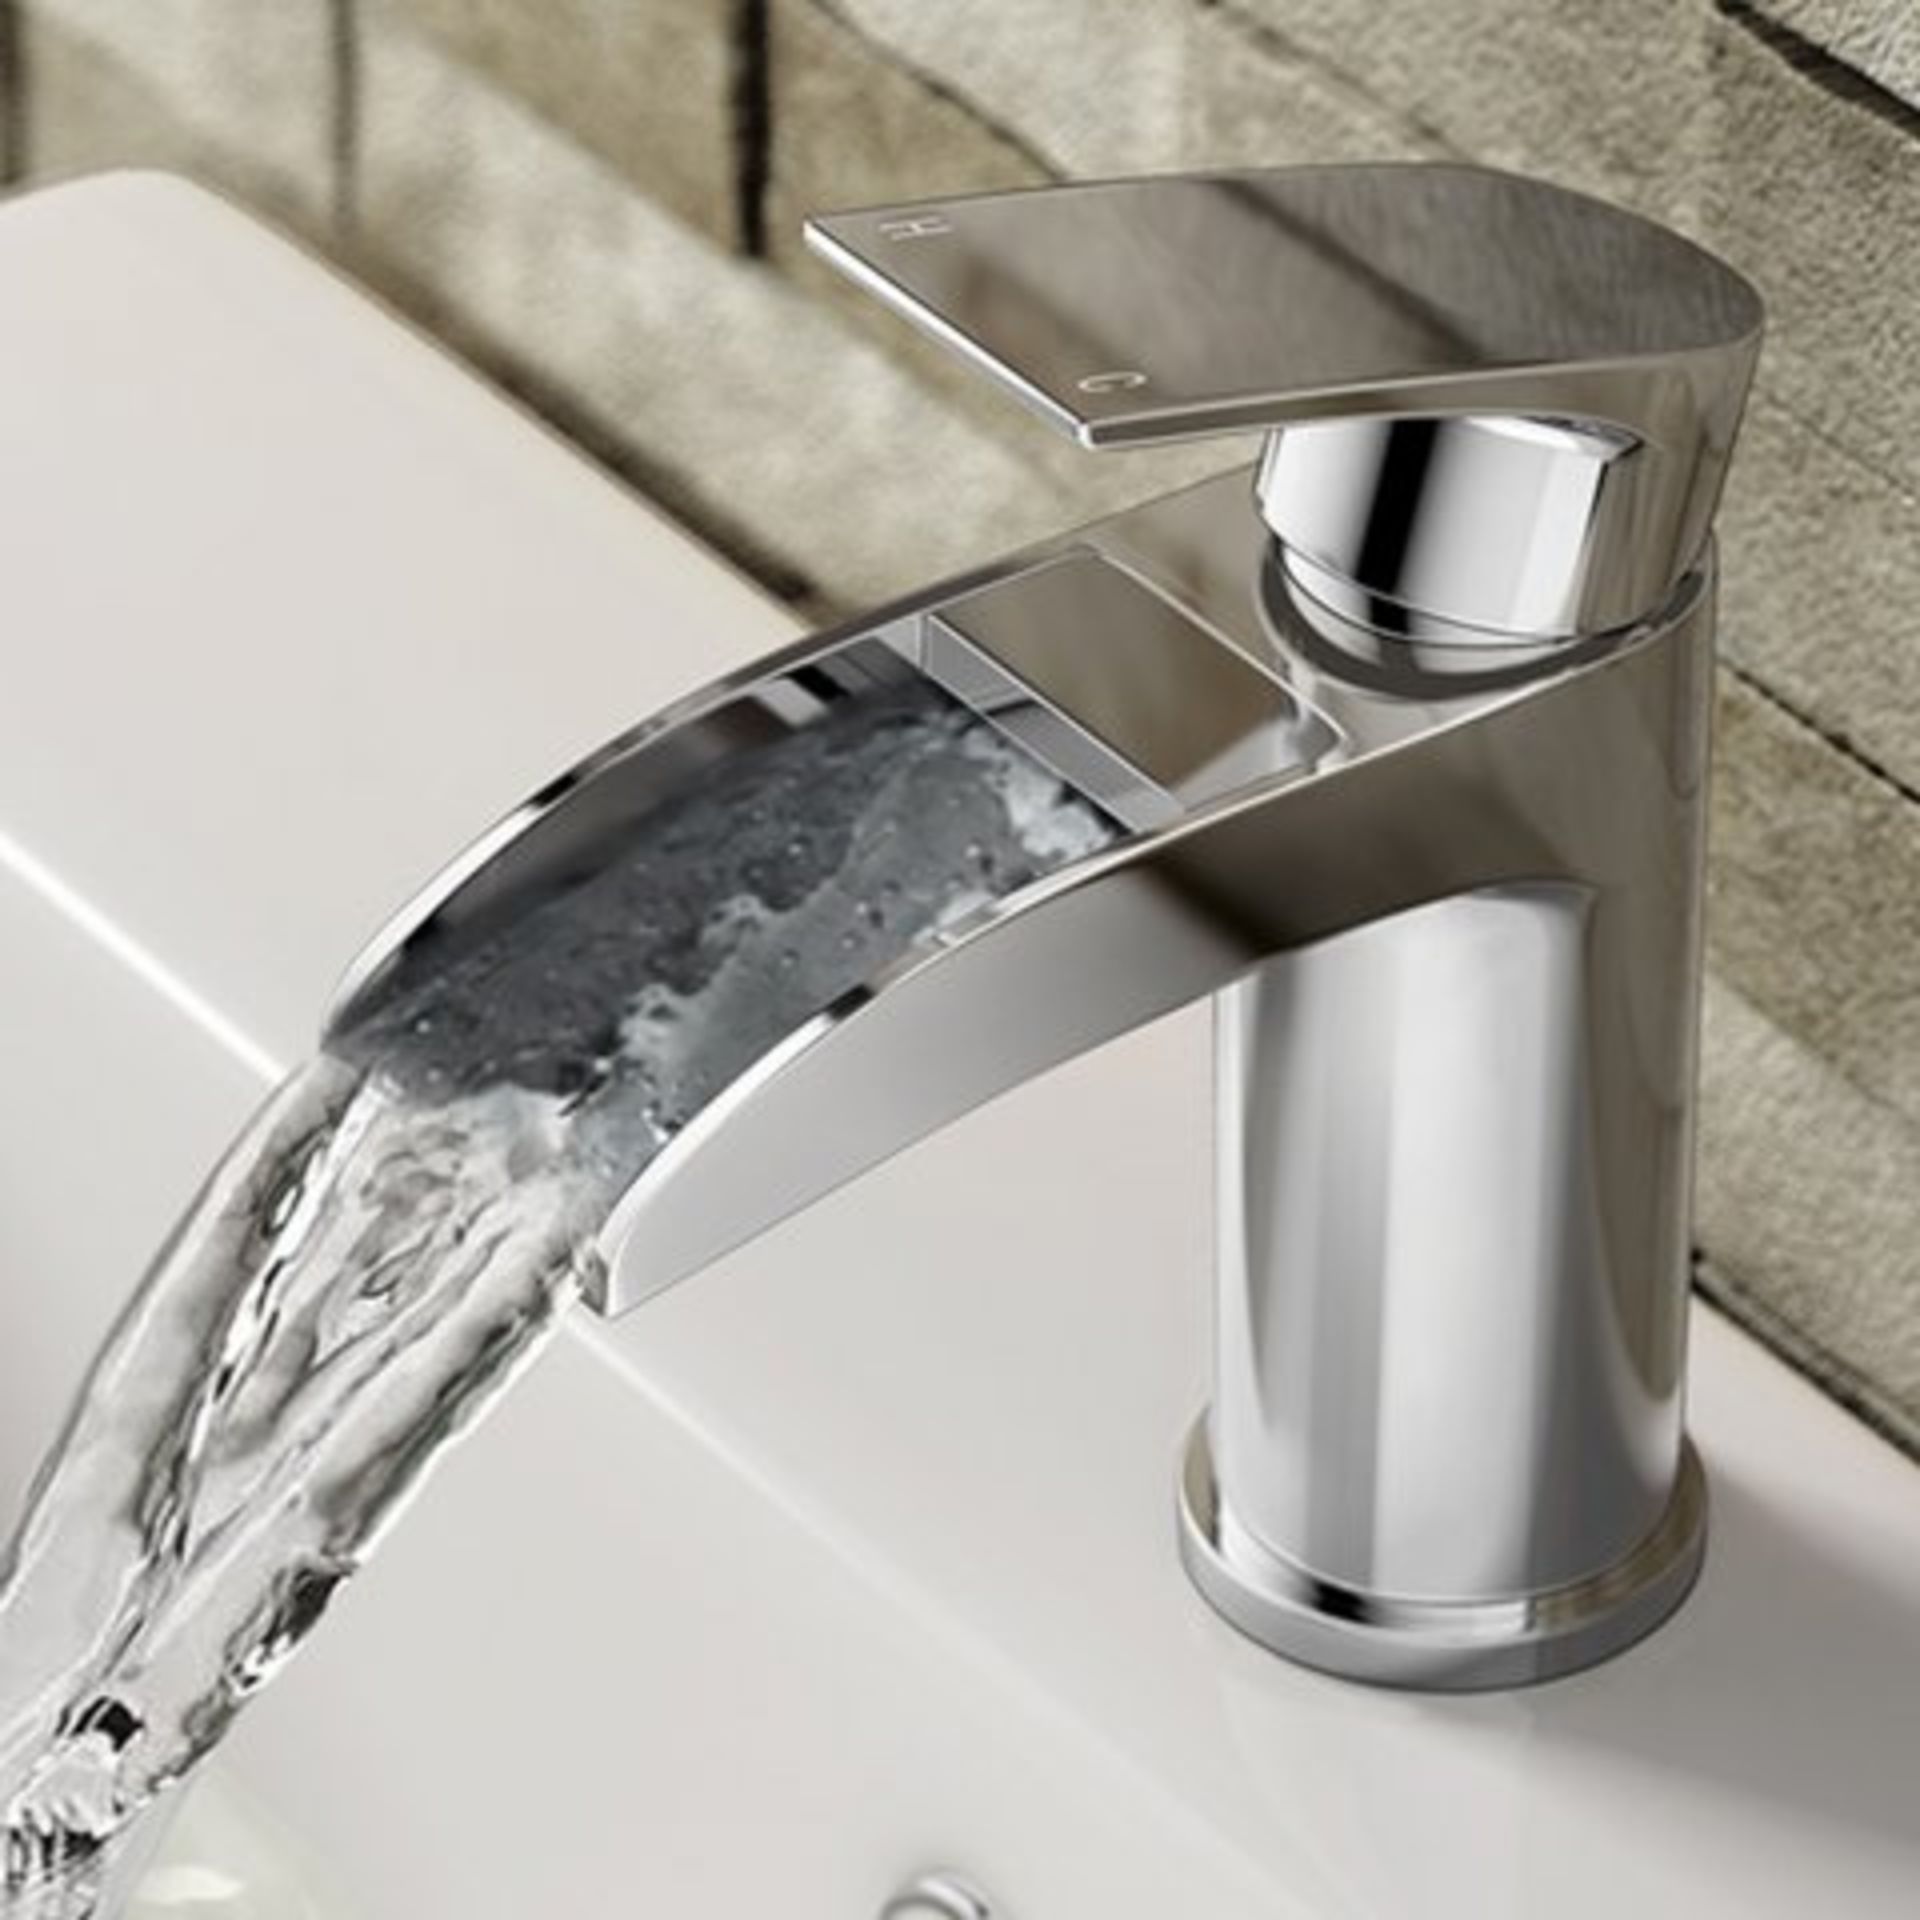 (H115) Avis II Waterfall Basin Mixer Tap Waterfall Feature Our range of waterfall taps add a touch - Image 4 of 4